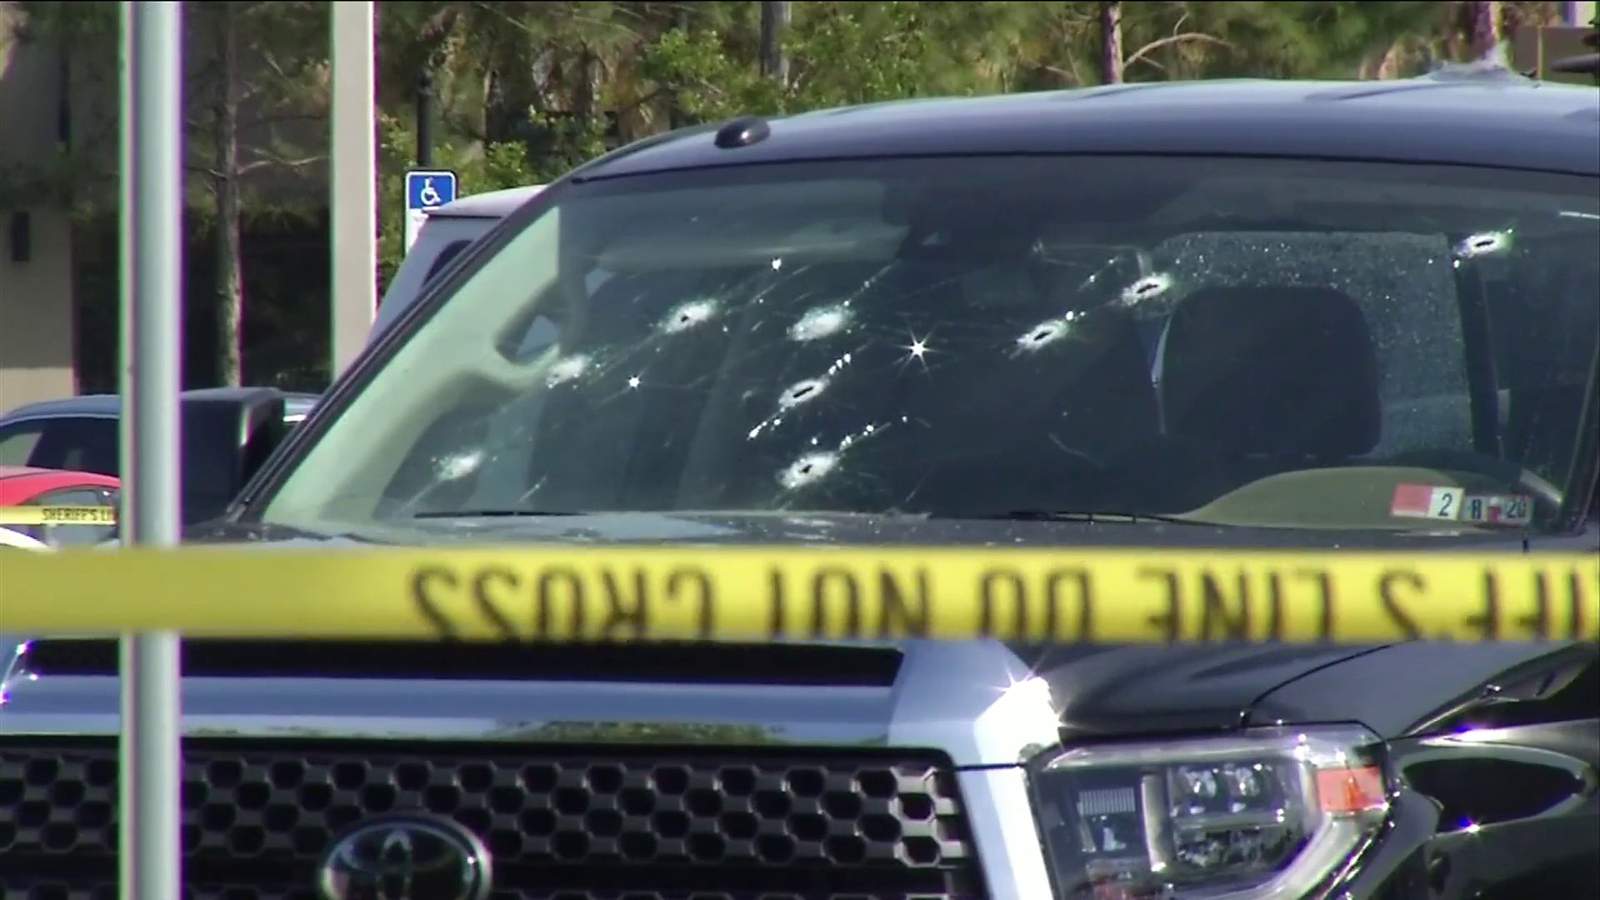 Sheriff: Suspect wounded after firing shots at deputy in Sawgrass